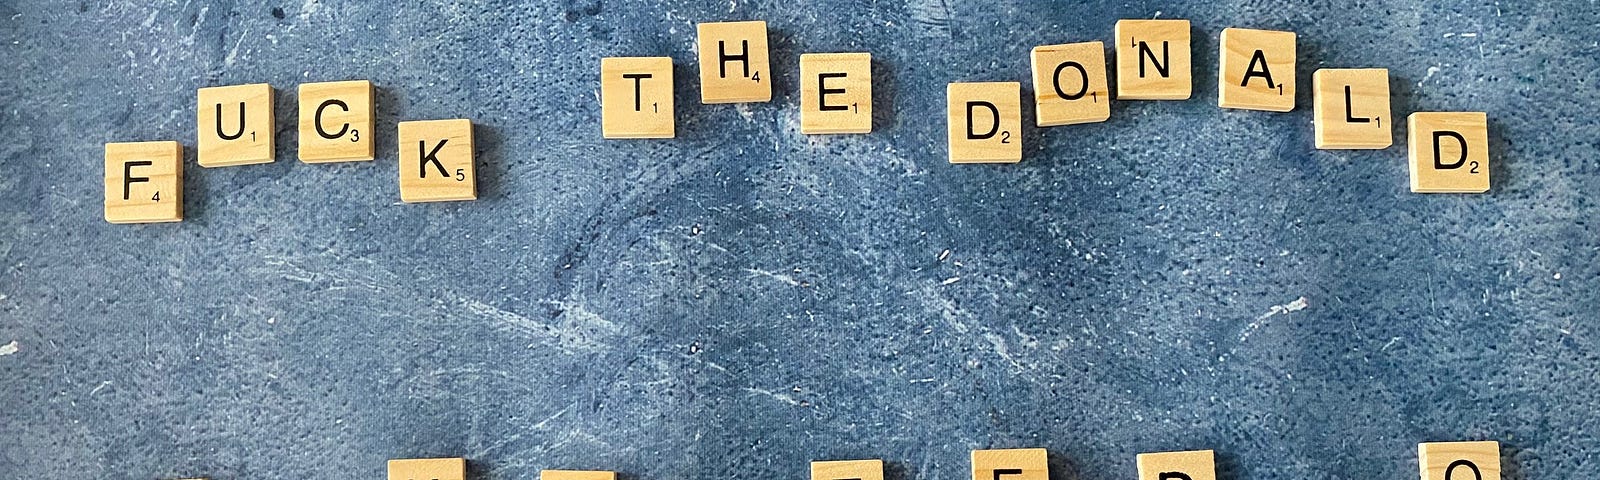 Anagram “Fuck the Donald” and “Dank Cult Fed Ho” using Scrabble tiles